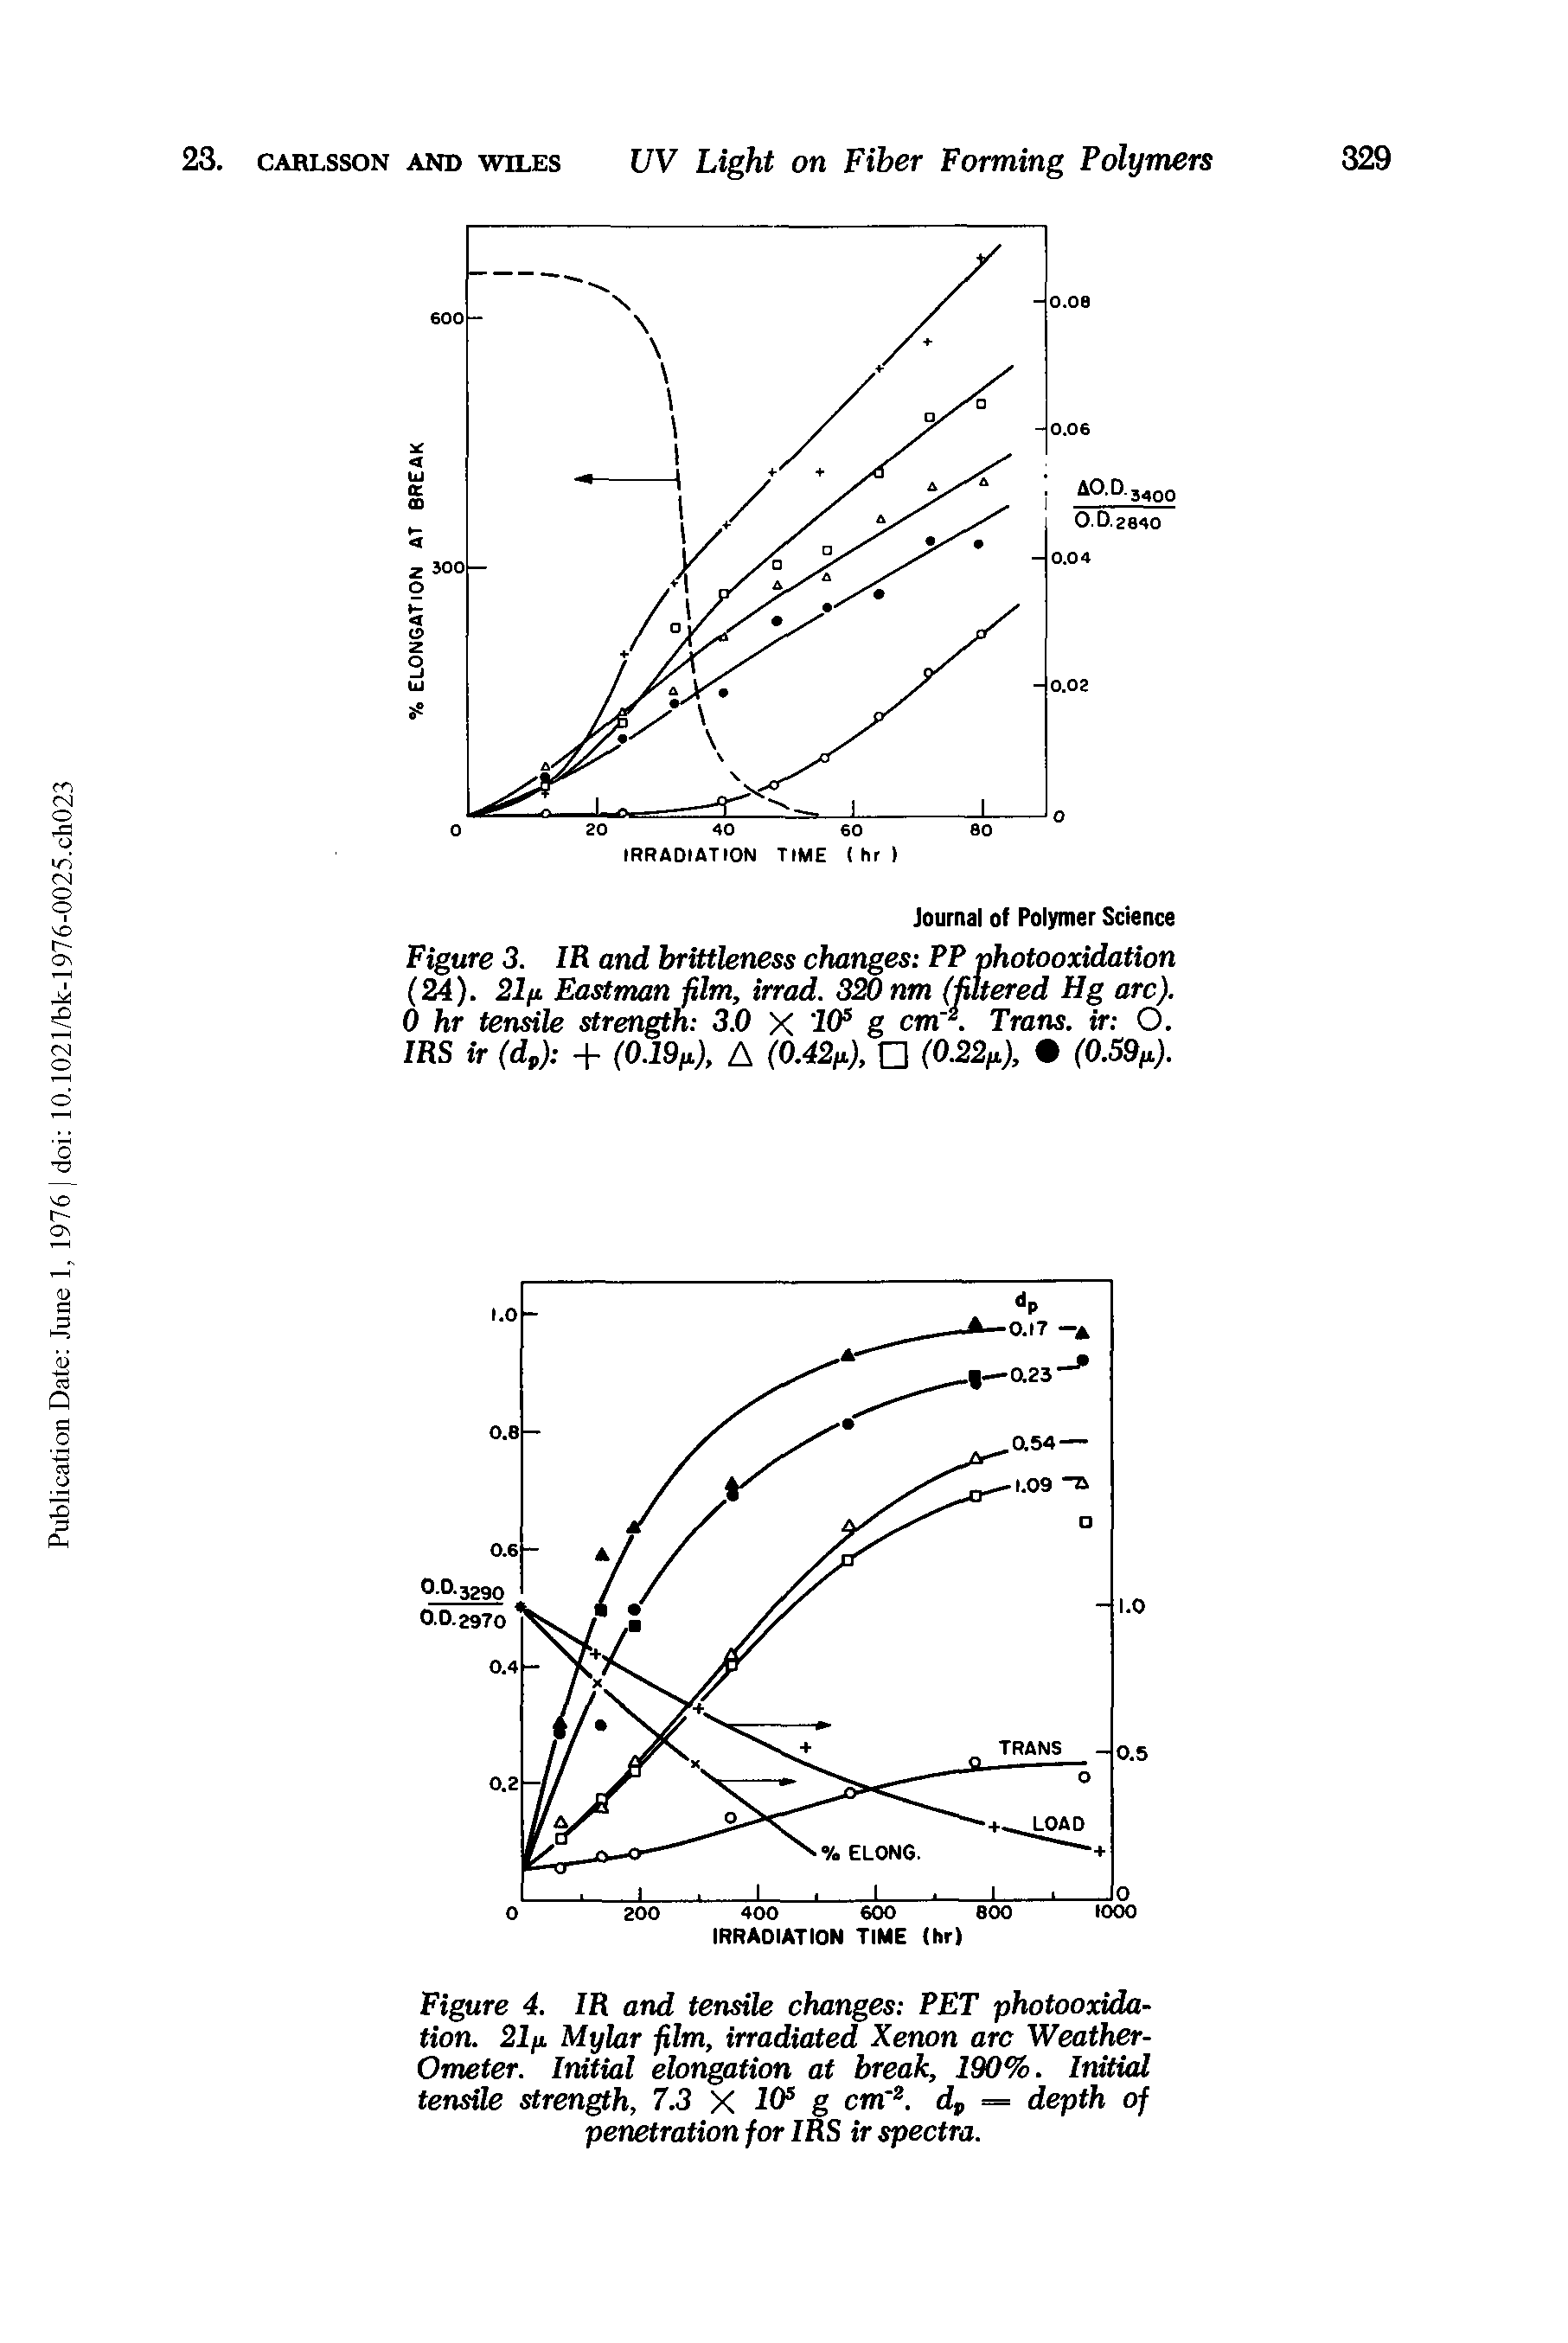 Figure 4. IR and tensile changes PET photooxidation. 21/1 Mylar film, irradiated Xenon arc Weather-Ometer. Initial elongation at break, 190%. Initial tensile strength, 7.3 X 1(P g cm. dp = depth of penetration for IRS ir spectra.